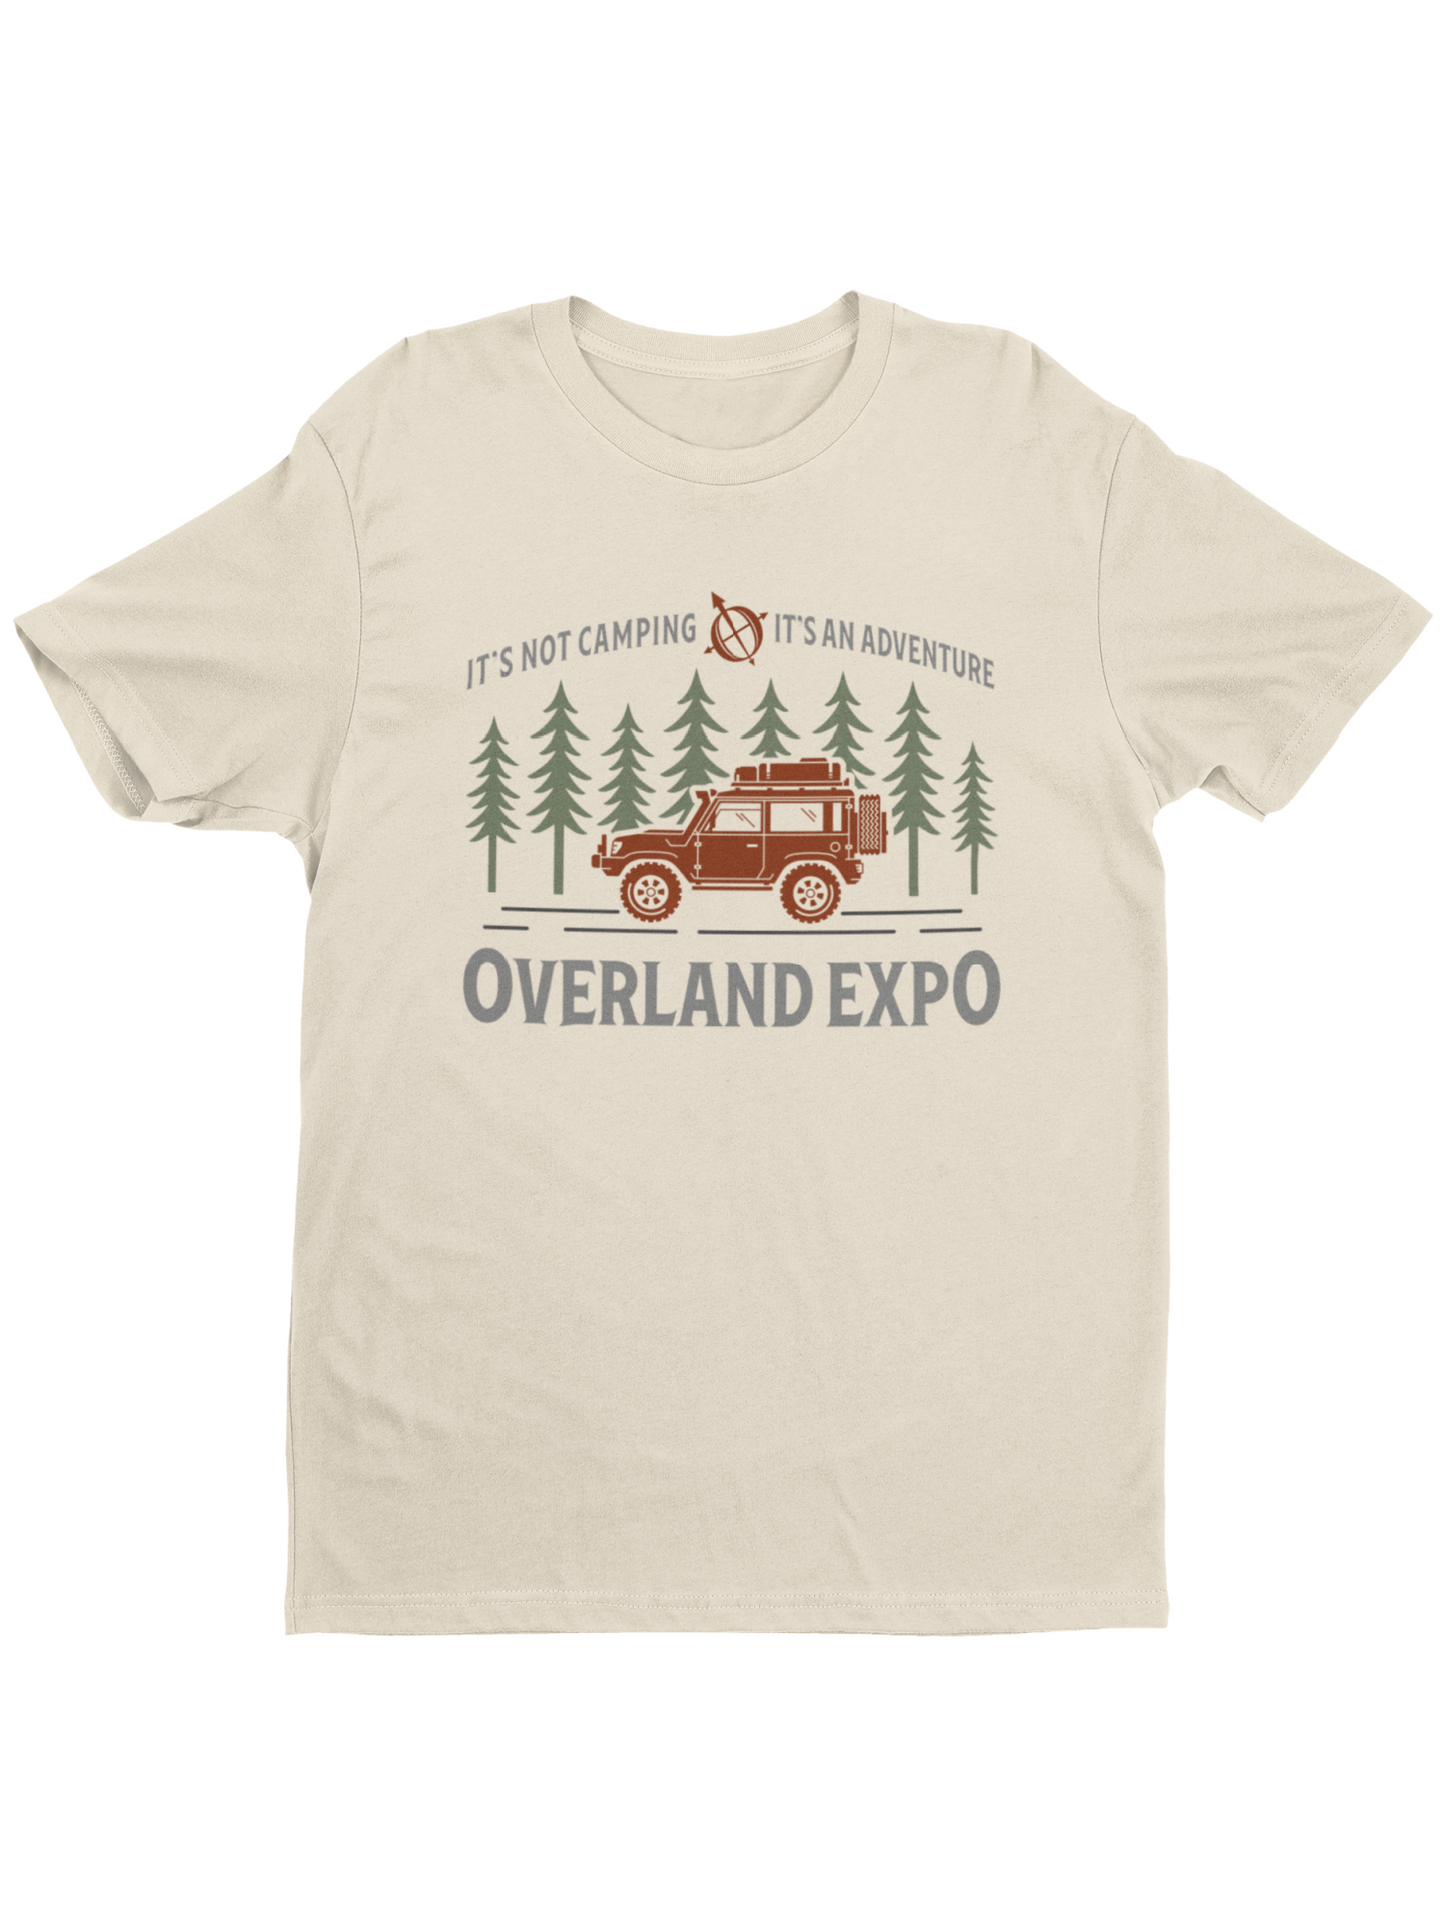 OE - It's Not Camping, It's and Adventure Tee - Ivory Cream